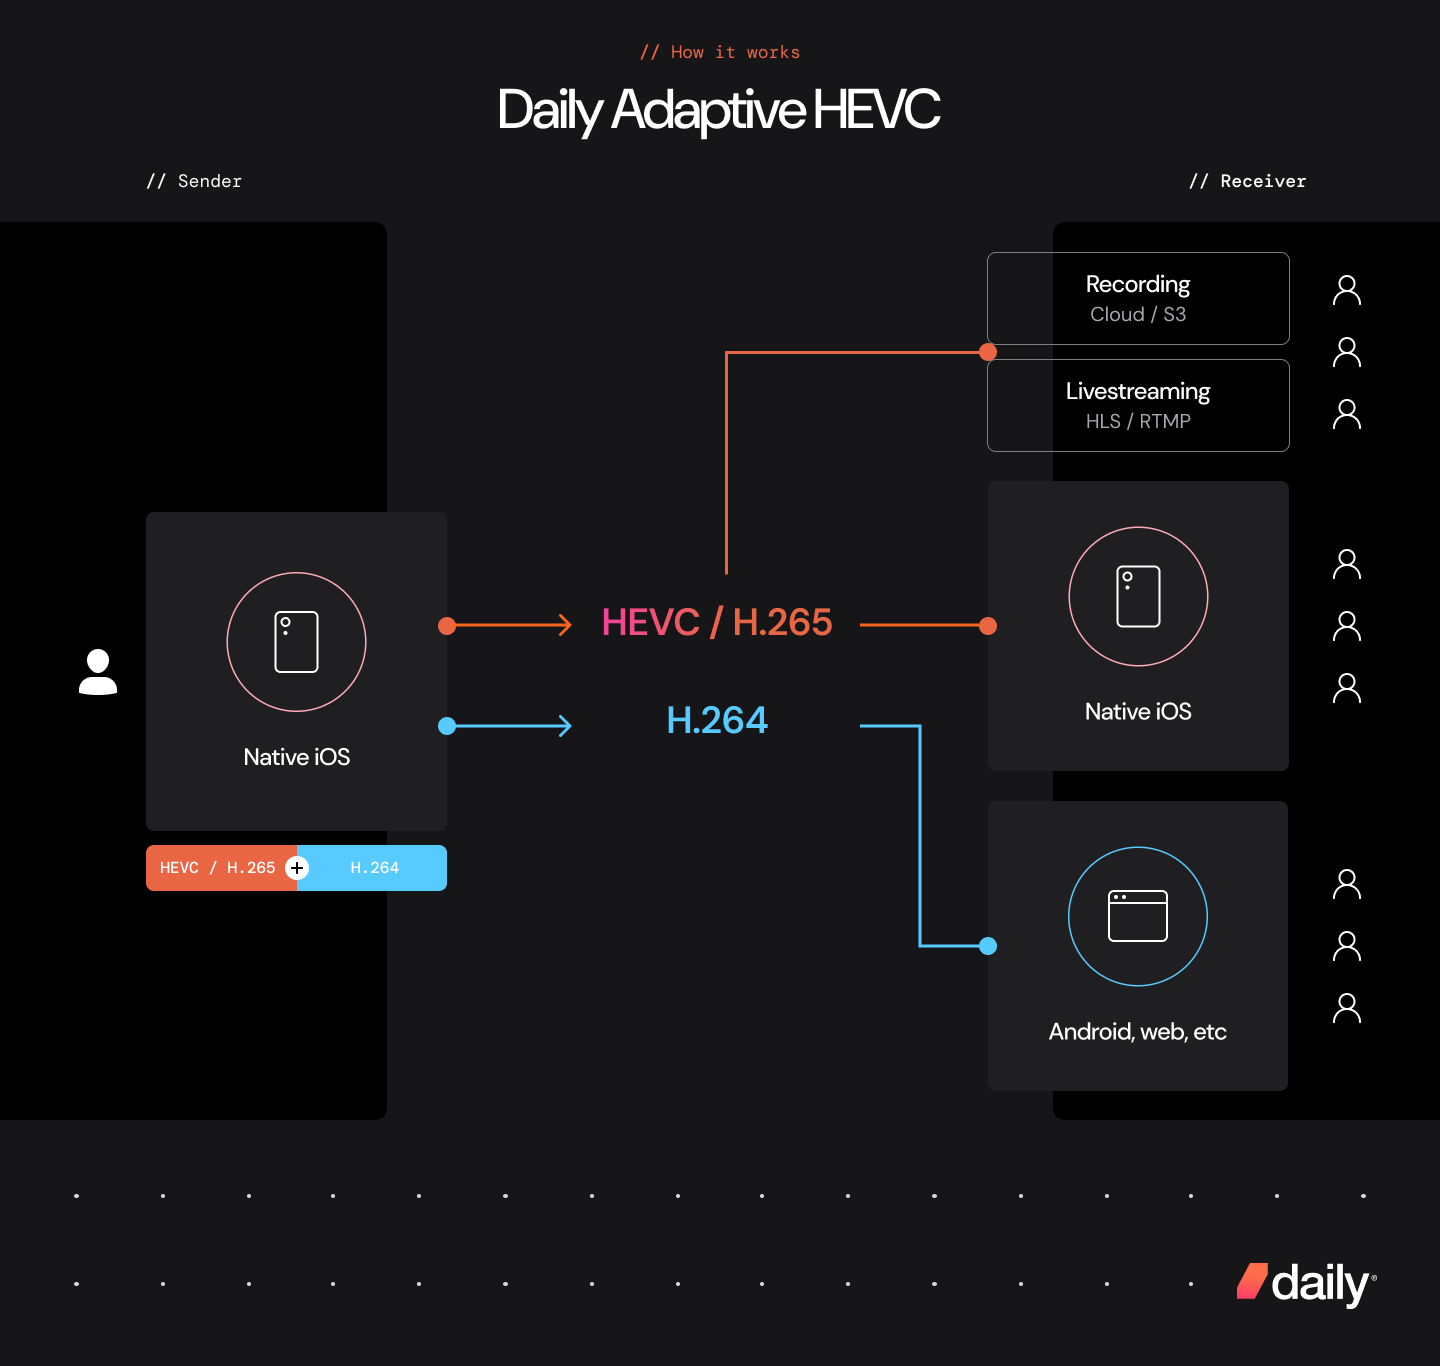 Daily Adaptive HEVC architecture diagram